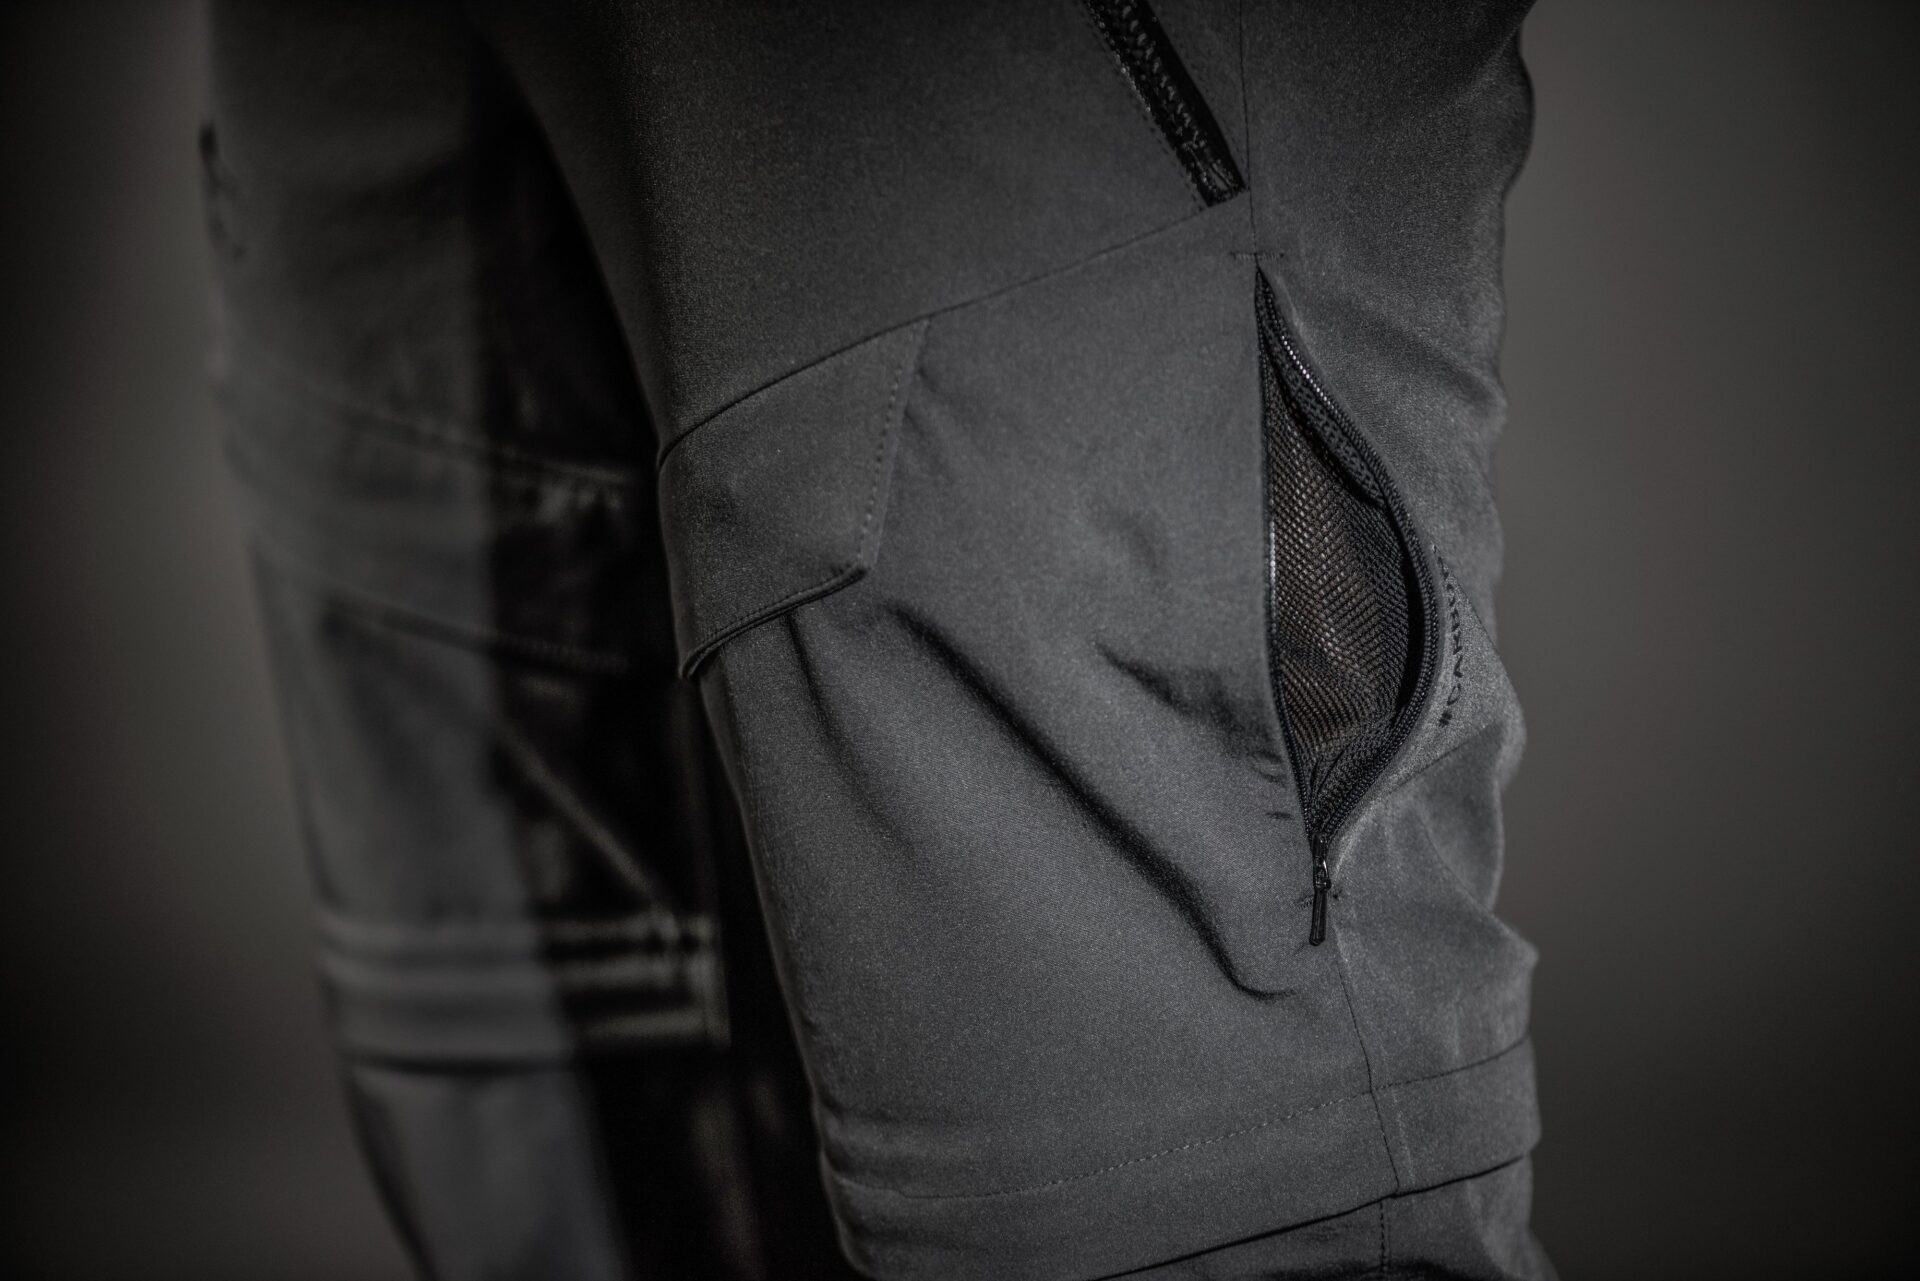 OMEGA pants by Graphene-X – Backers